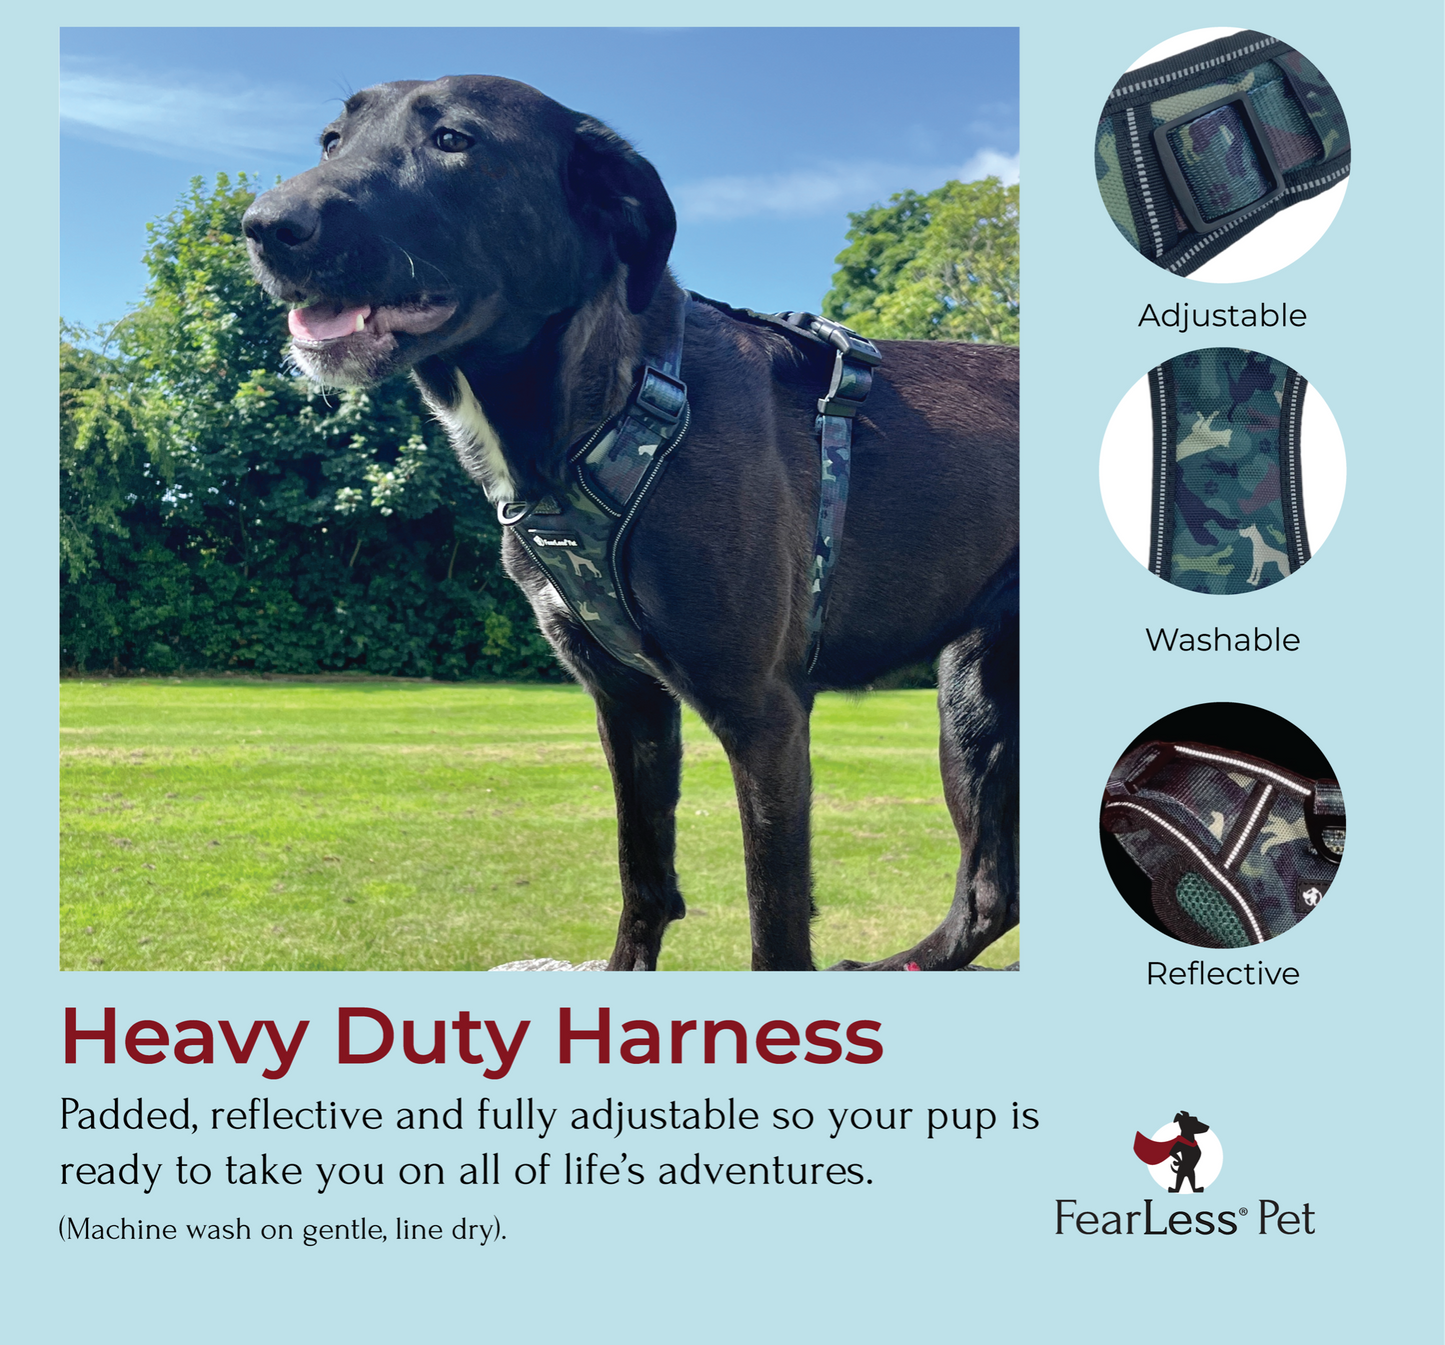 an infographic of a green camoflauge dog harness on a black dog with green grass in the background. To the side of photo are 3 bubbles indicating the harness is adjustable, washable and reflective